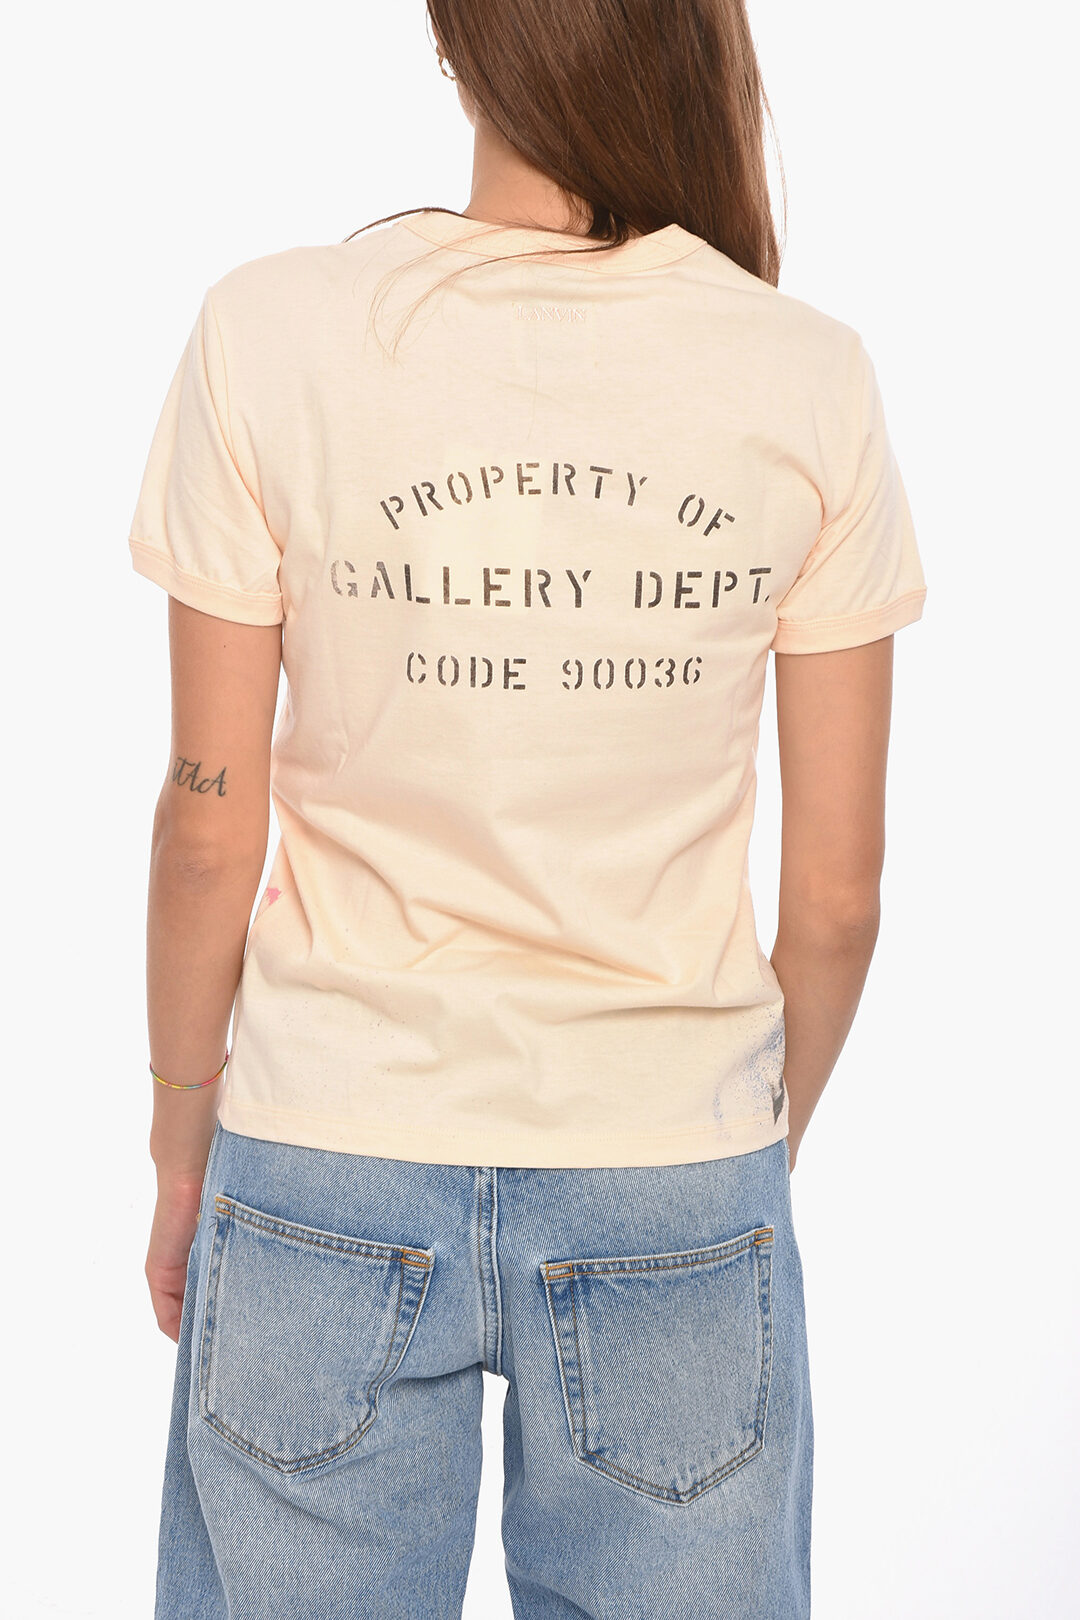 GALLERY DEPT T-shirt with Paint Splatter Motif and Embroidered Logo  Lettering